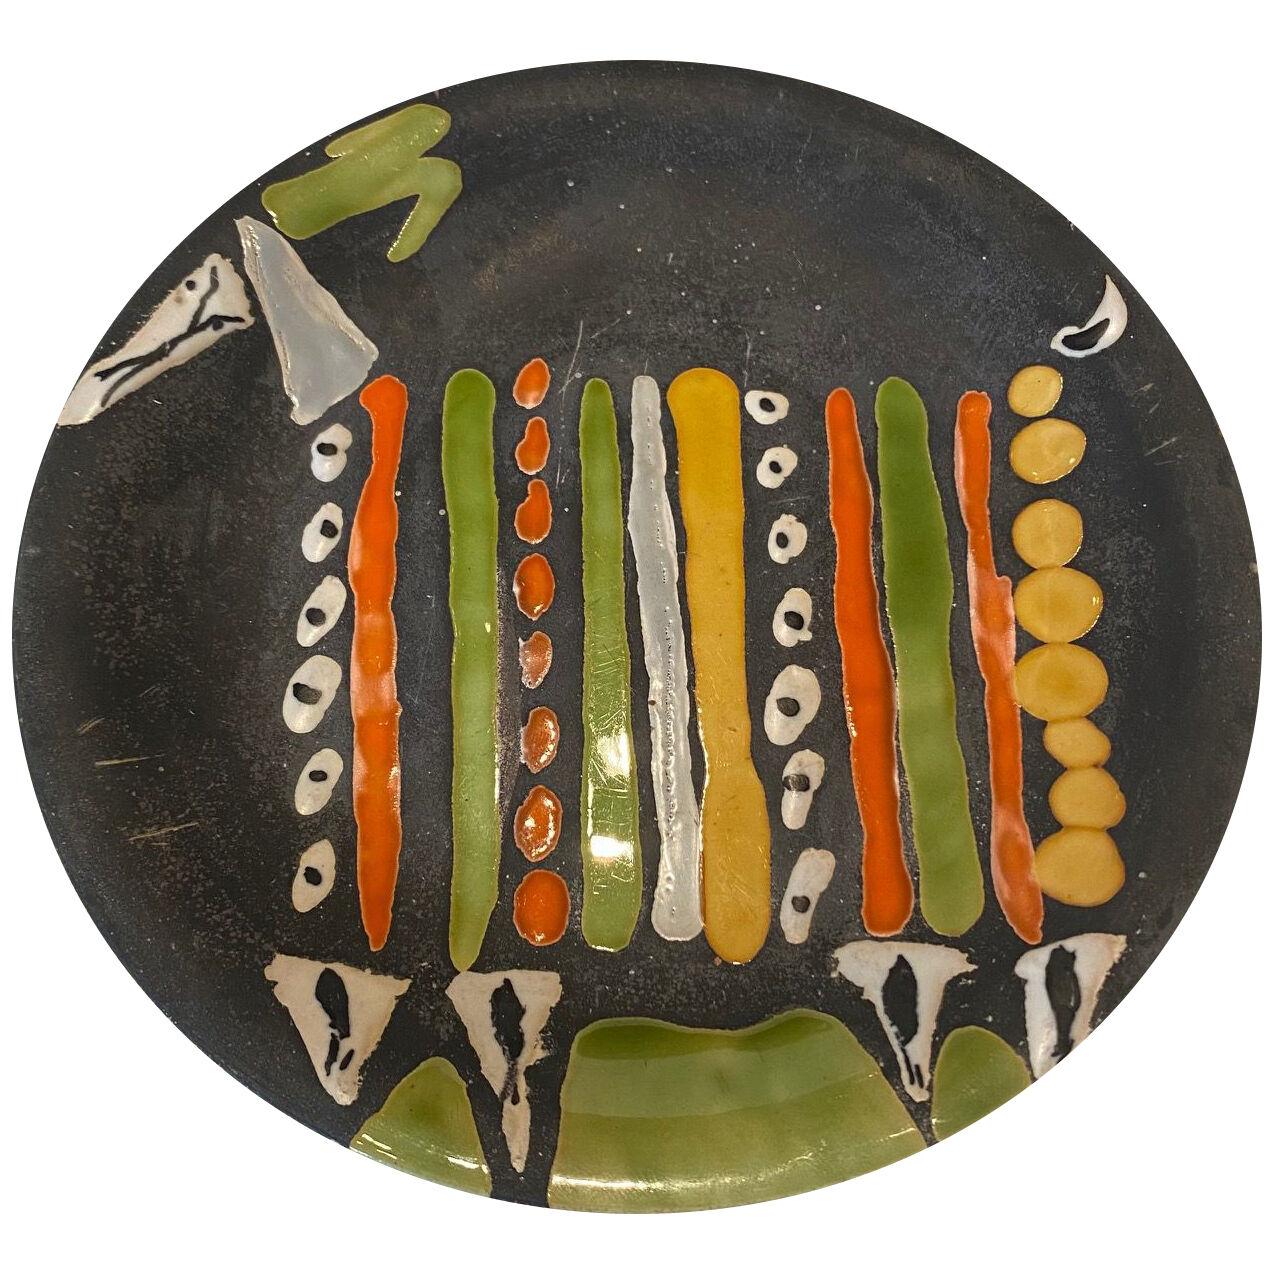 Ceramic Plate by Roger Capron, Vallauris, France, 1960s